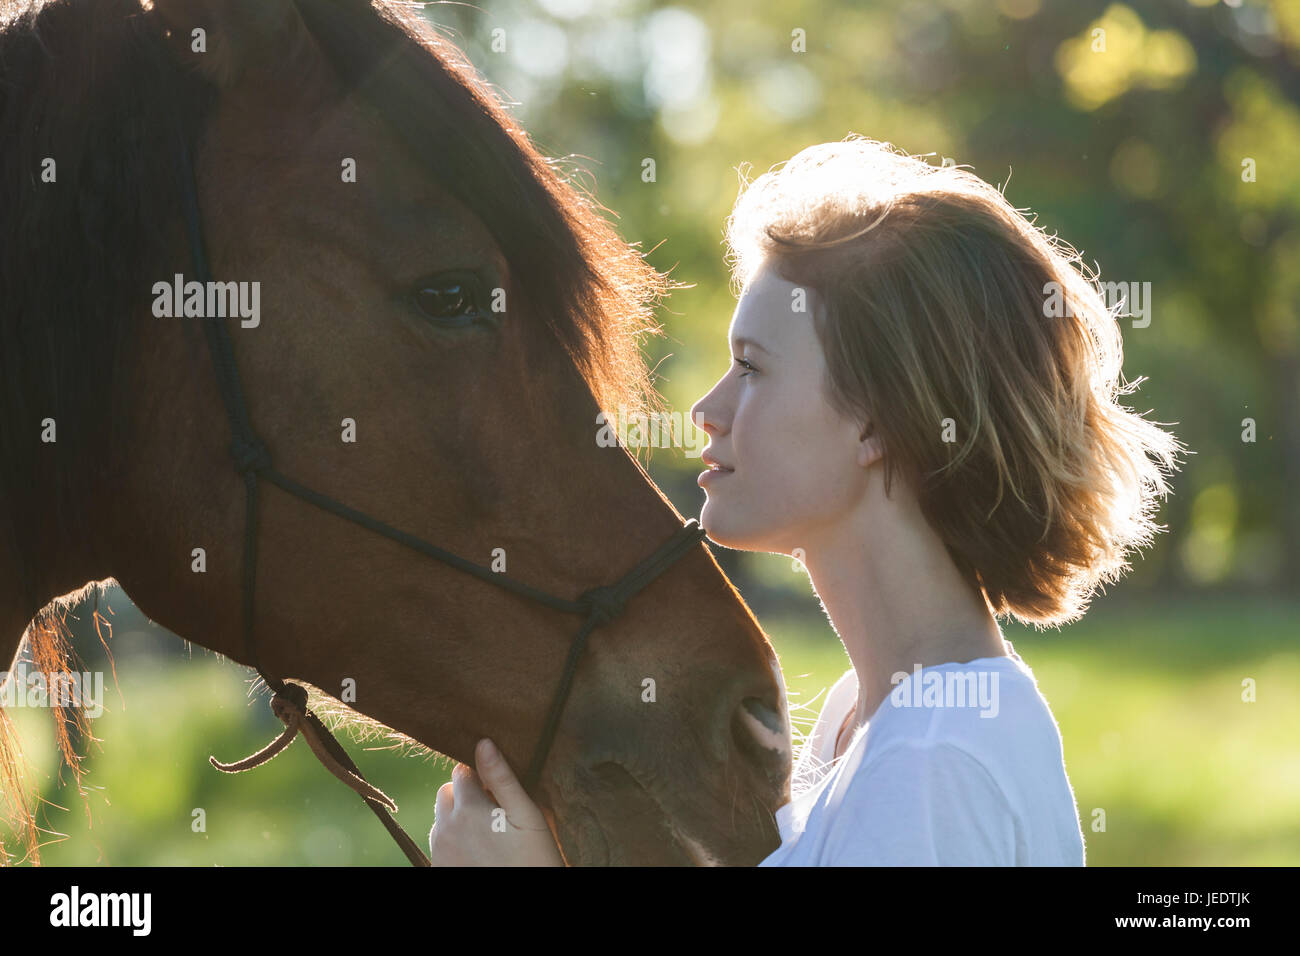 Profiles of young woman and horse at backlight Stock Photo